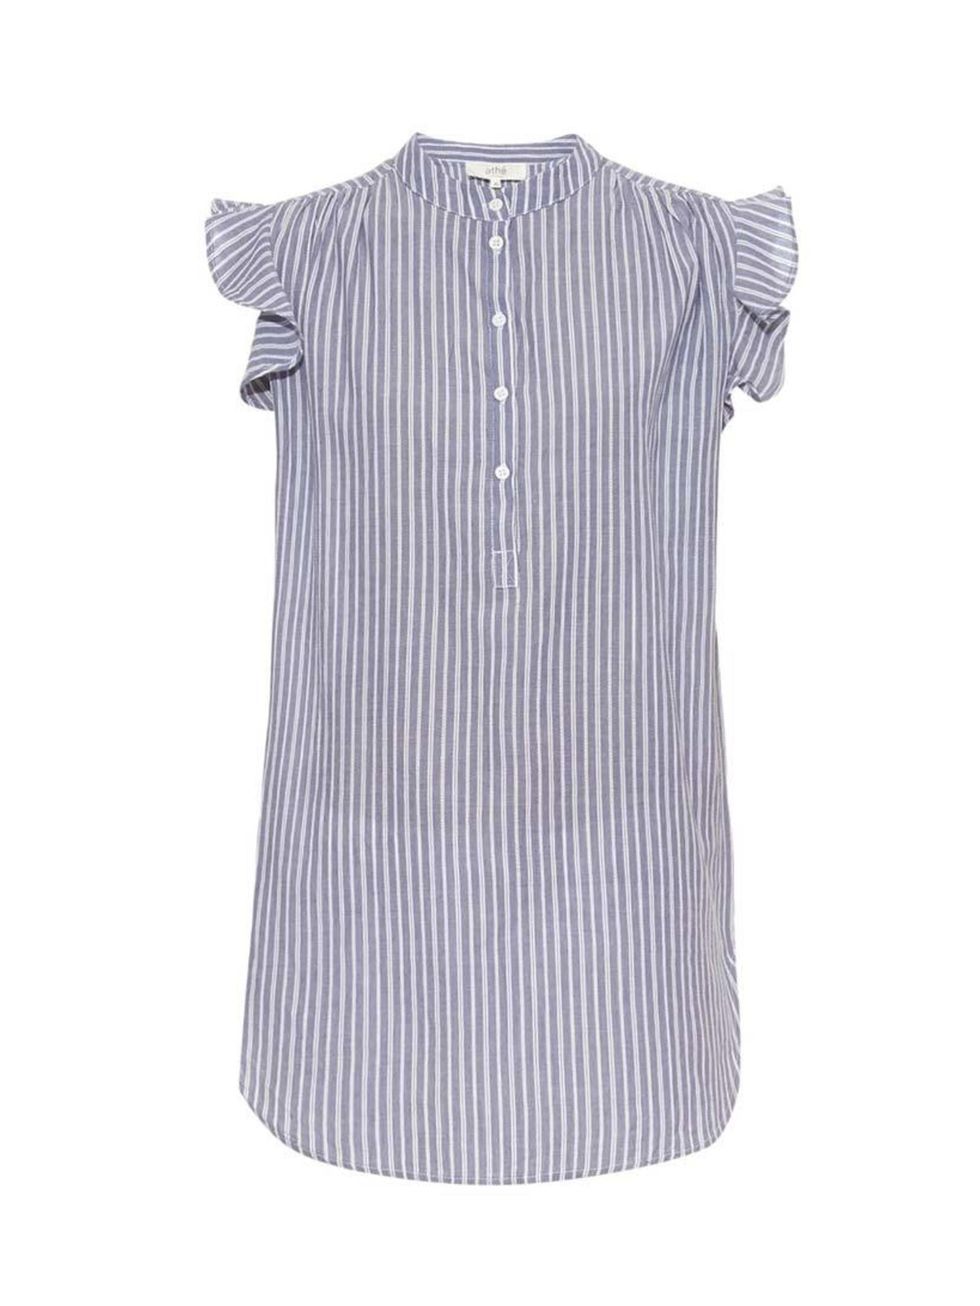 <p>Blue and white stripes herald the start of summer.</p>

<p>Vanessa Bruno Athé shirt, £145 at <a href="http://www.matchesfashion.com/products/Vanessa-Bruno-Ath%C3%A9-Caitleen-ruffle-sleeve-striped-cotton-shirt-1010553#" target="_blank">MatchesFashion.co